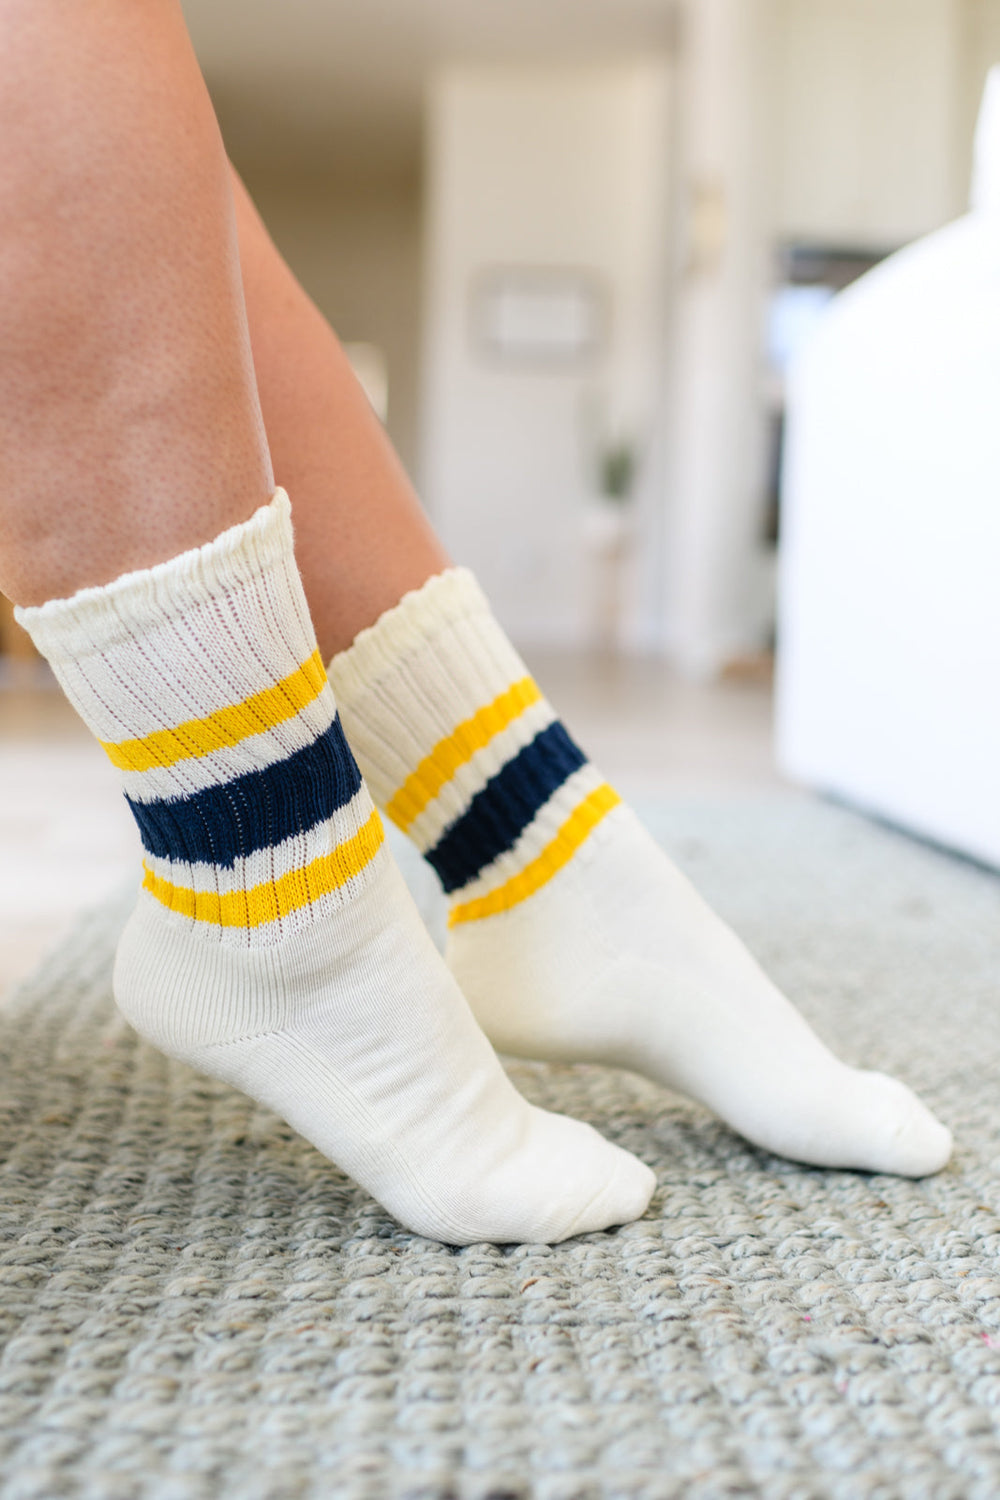 Womens - World's Best Dad Socks In Navy And Yellow